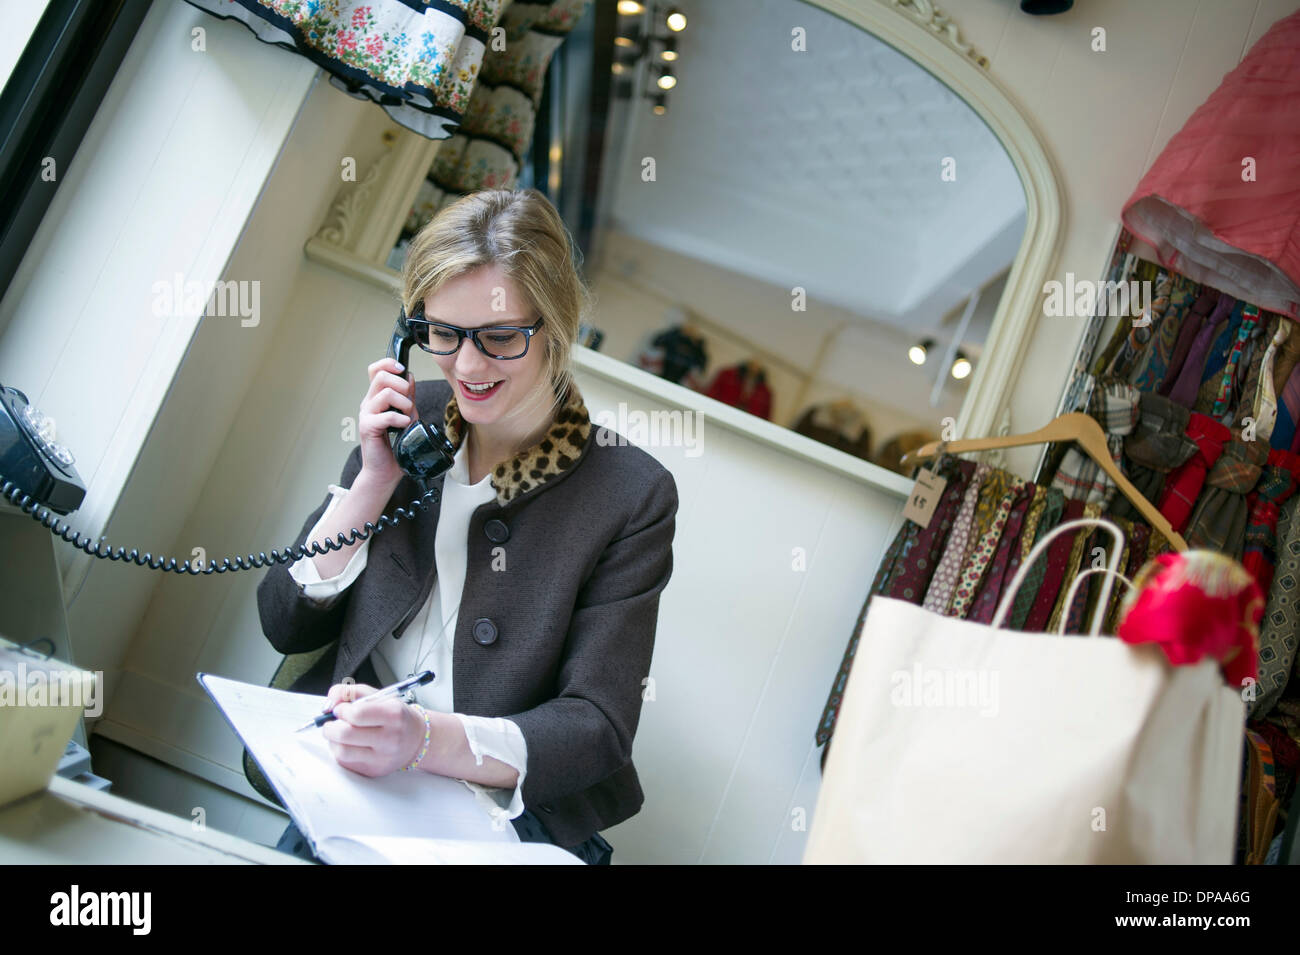 Sales assistant taking phone call Stock Photo